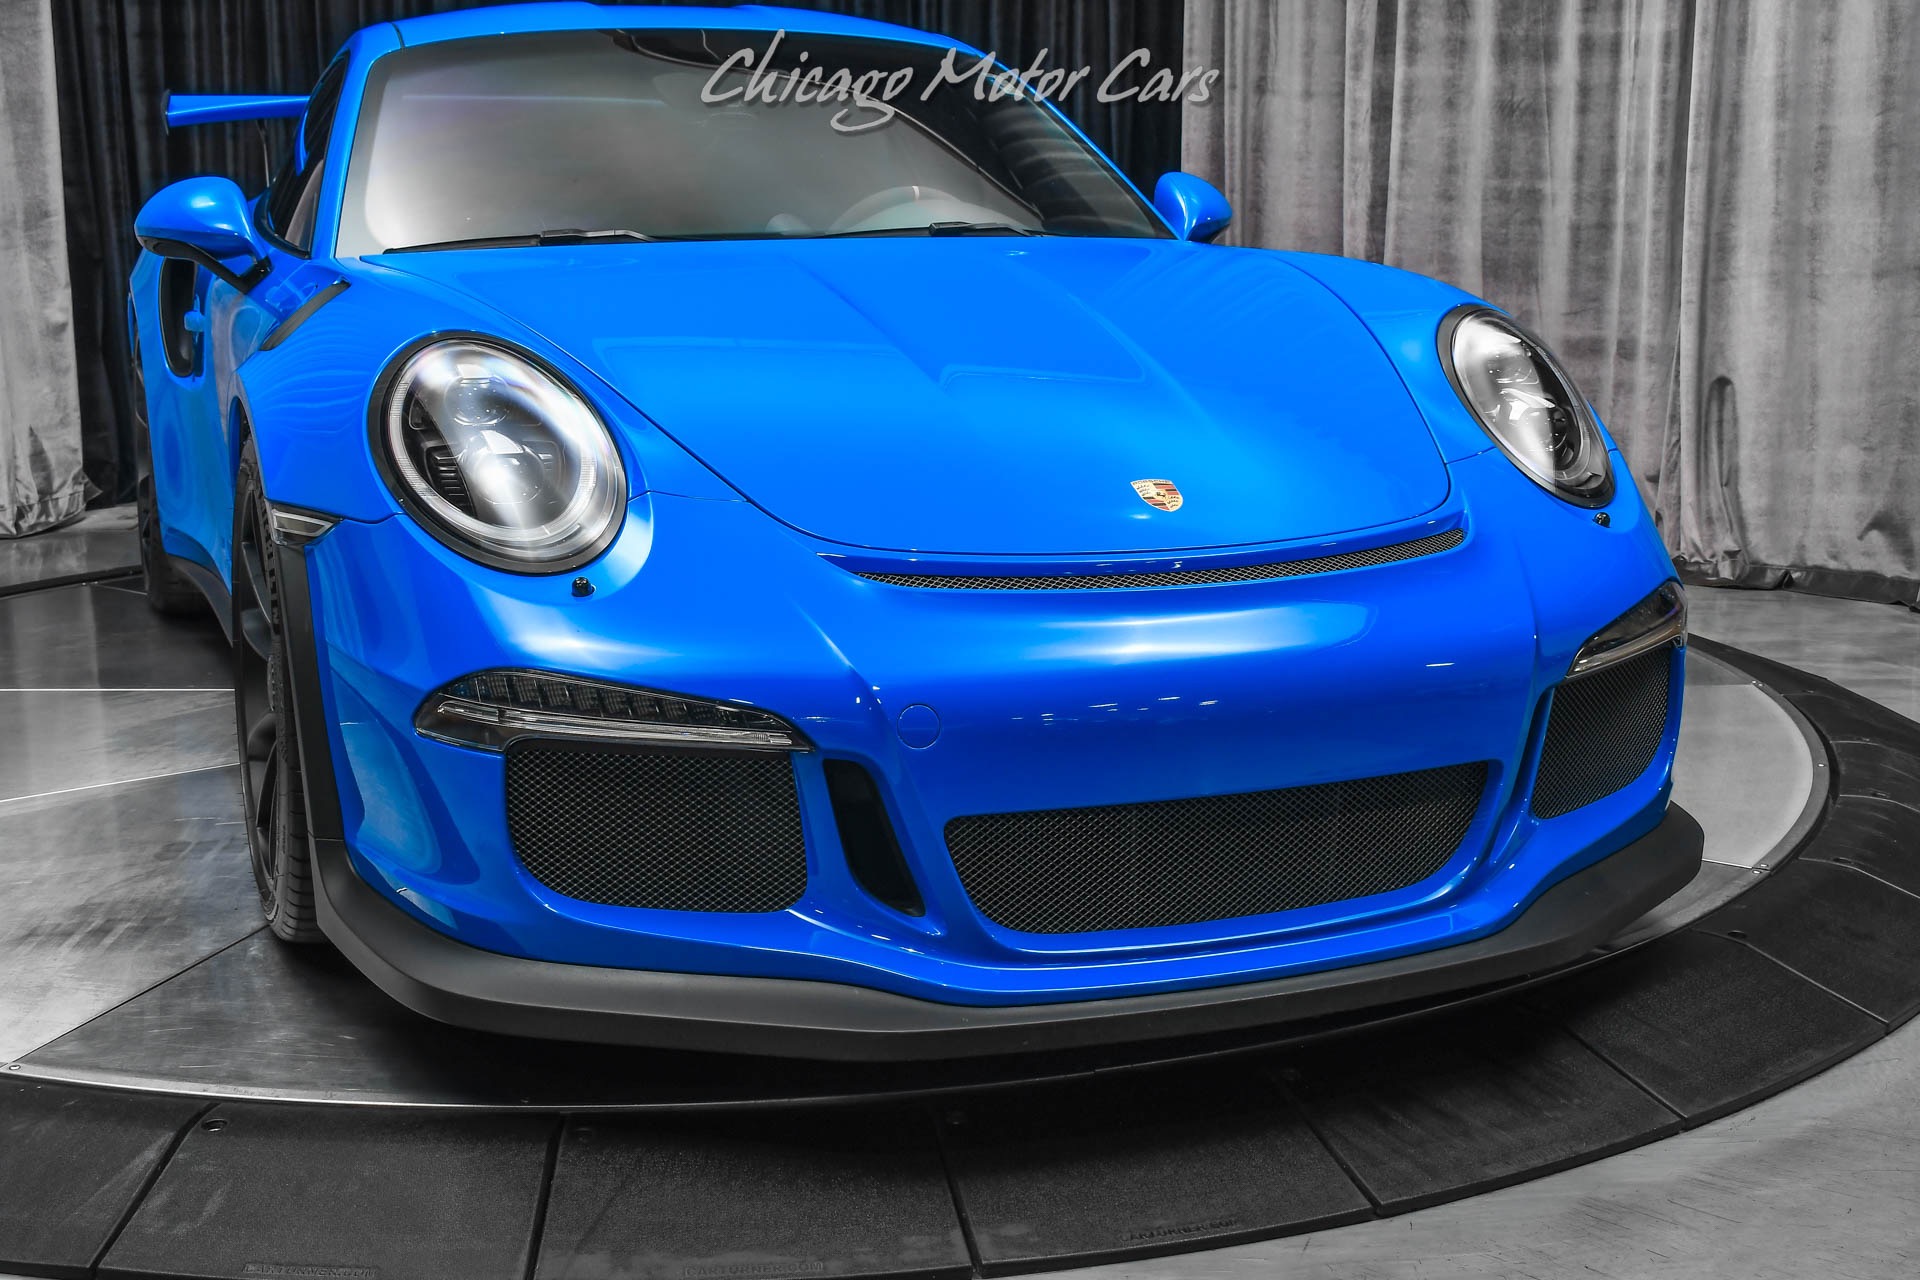 Used-2016-Porsche-911-GT3-RS-PTS-Voodoo-Blue-ONLY-2900-Miles-Front-Lift-FULL-PPF-LOADED-PERFEC